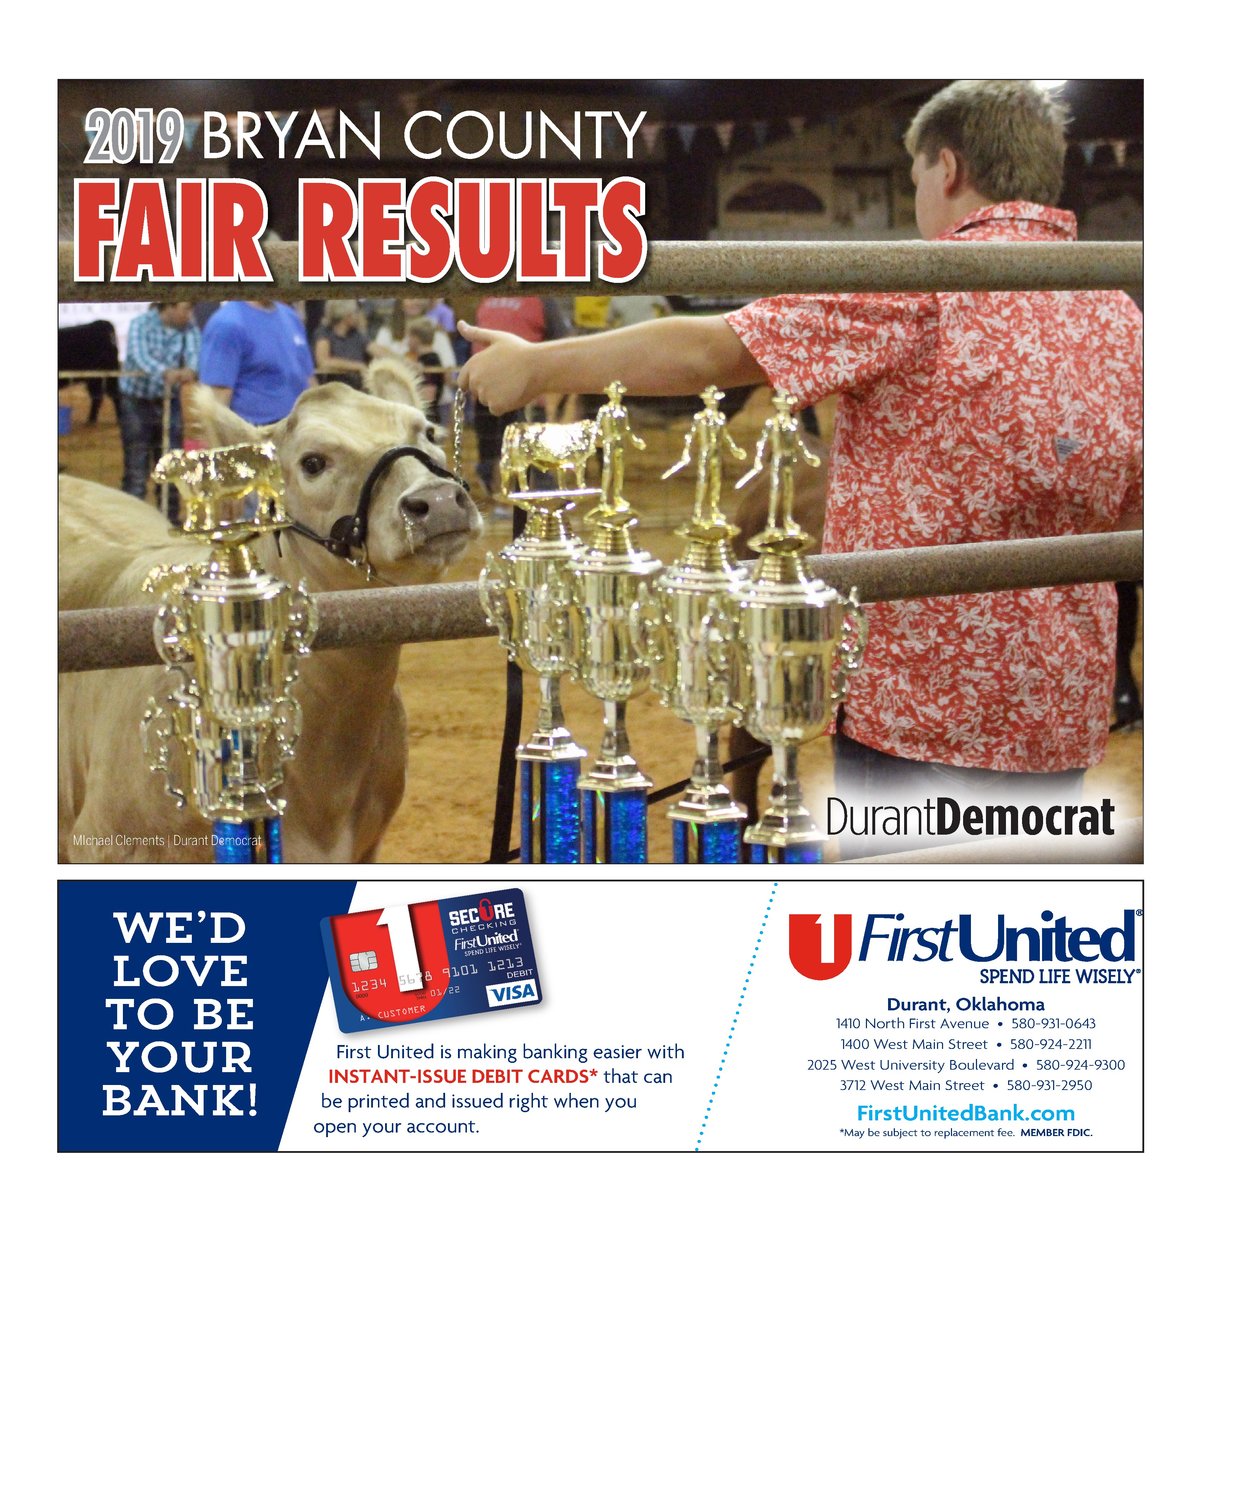 2019 BRYAN COUNTY FAIR RESULTS The Durant Daily Democrat